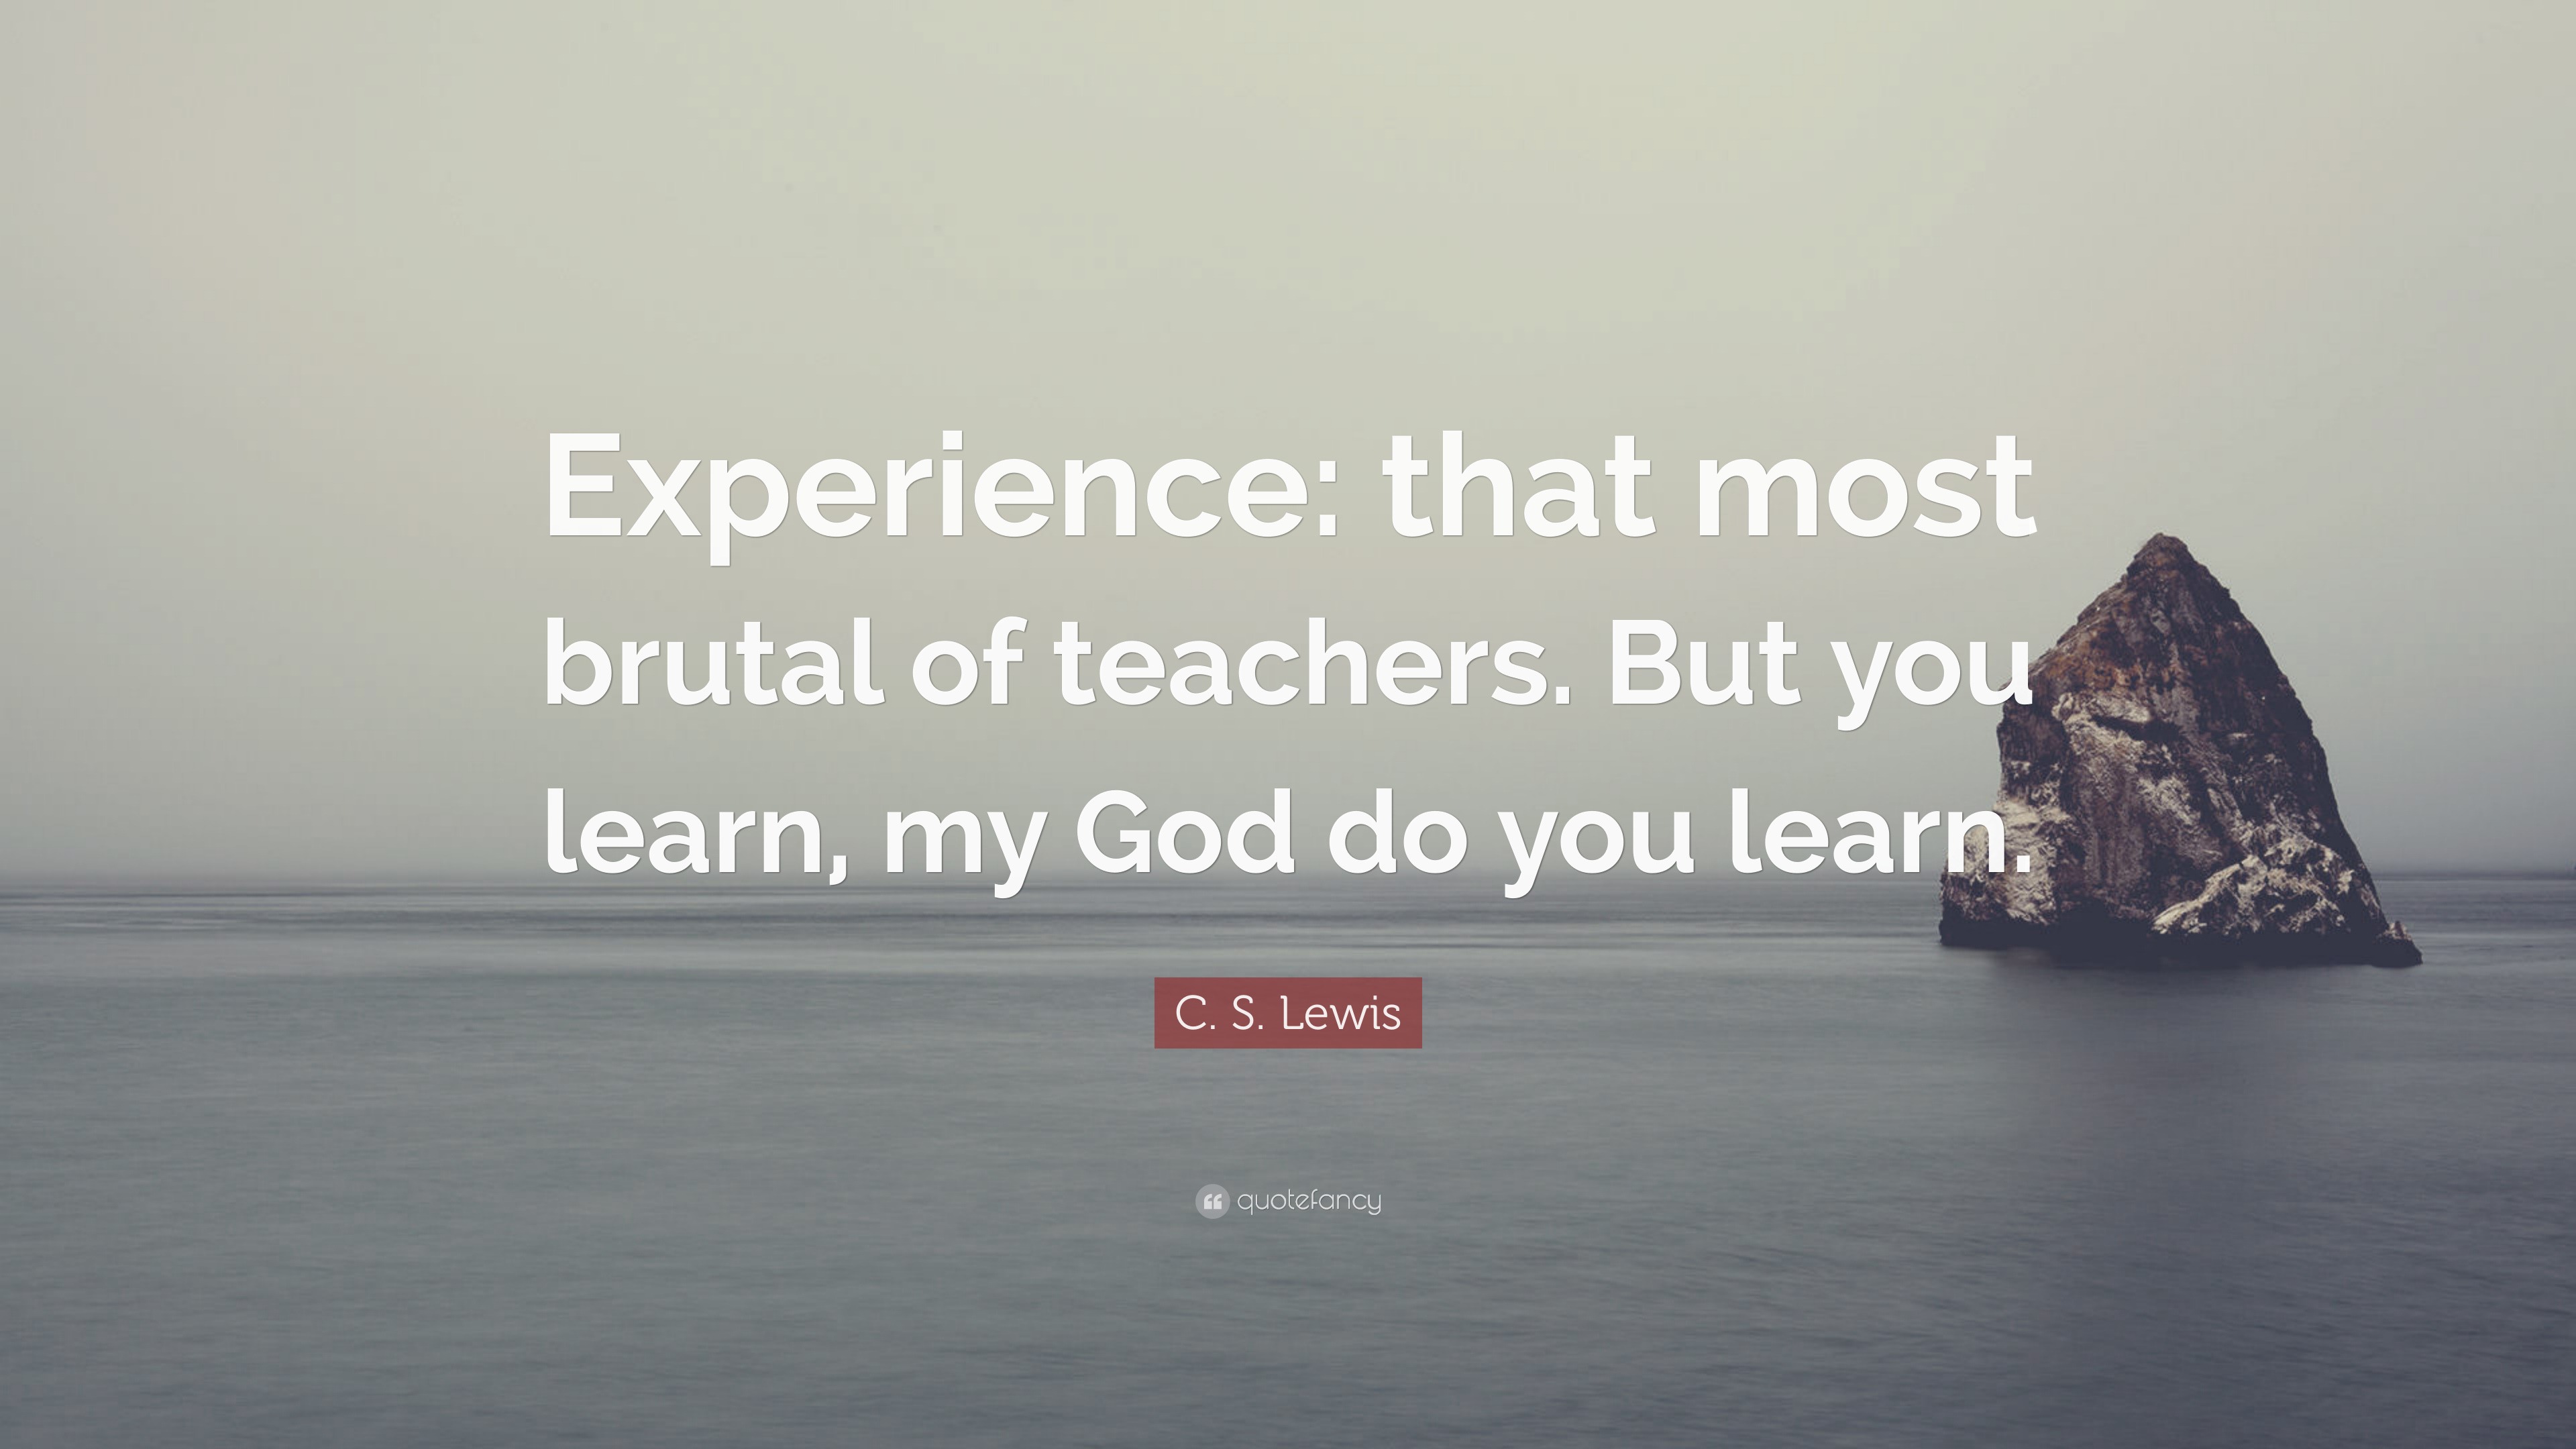 C. S. Lewis Quote: “Experience: that most brutal of teachers. But you